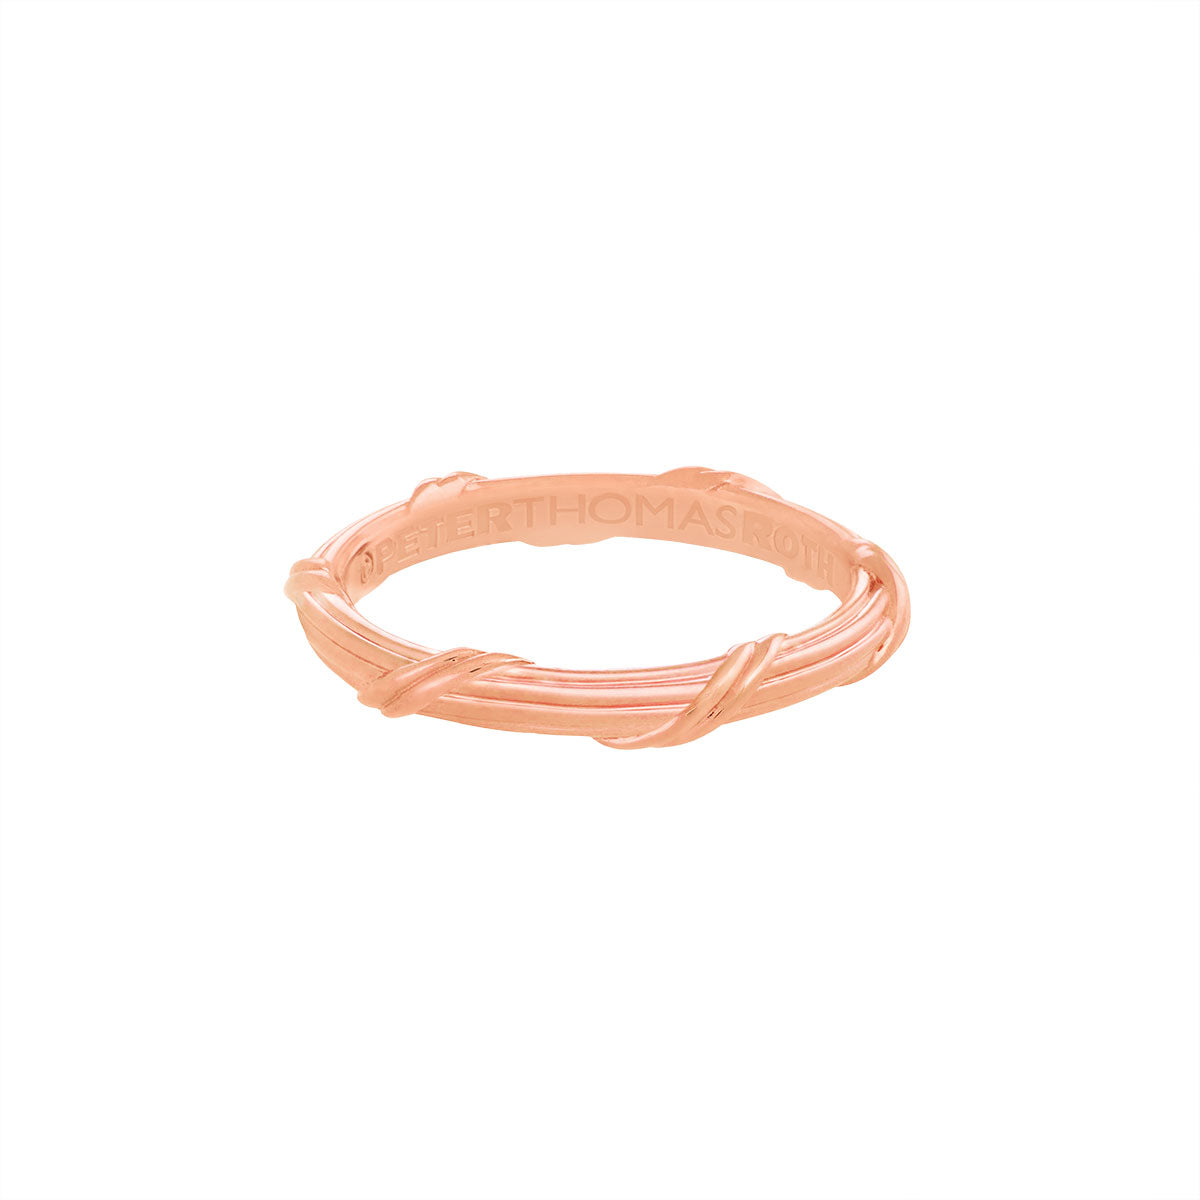 Heritage Eternity Band in 18K rose gold 3 mm Sizes 10 - 13